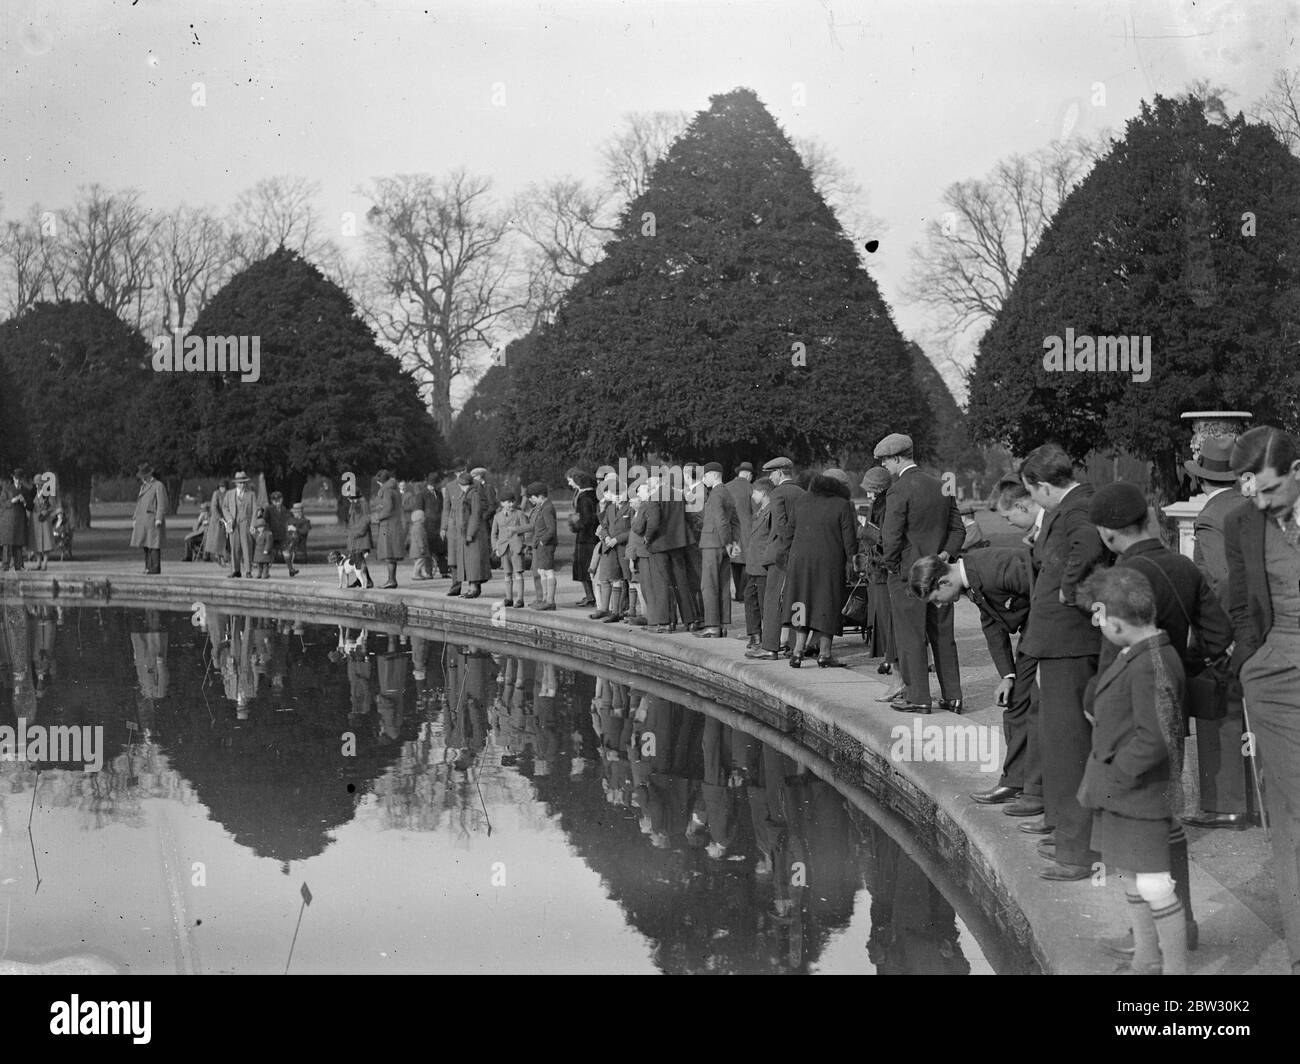 Sunday crowds at Hampton court . The brilliant sunshine of the first Sunday of spring brought out large numbers of visitors to Hampton Court Palace . Crowds at Hampton Court Palace beside the lily pond . 20 March 1932 . Stock Photo